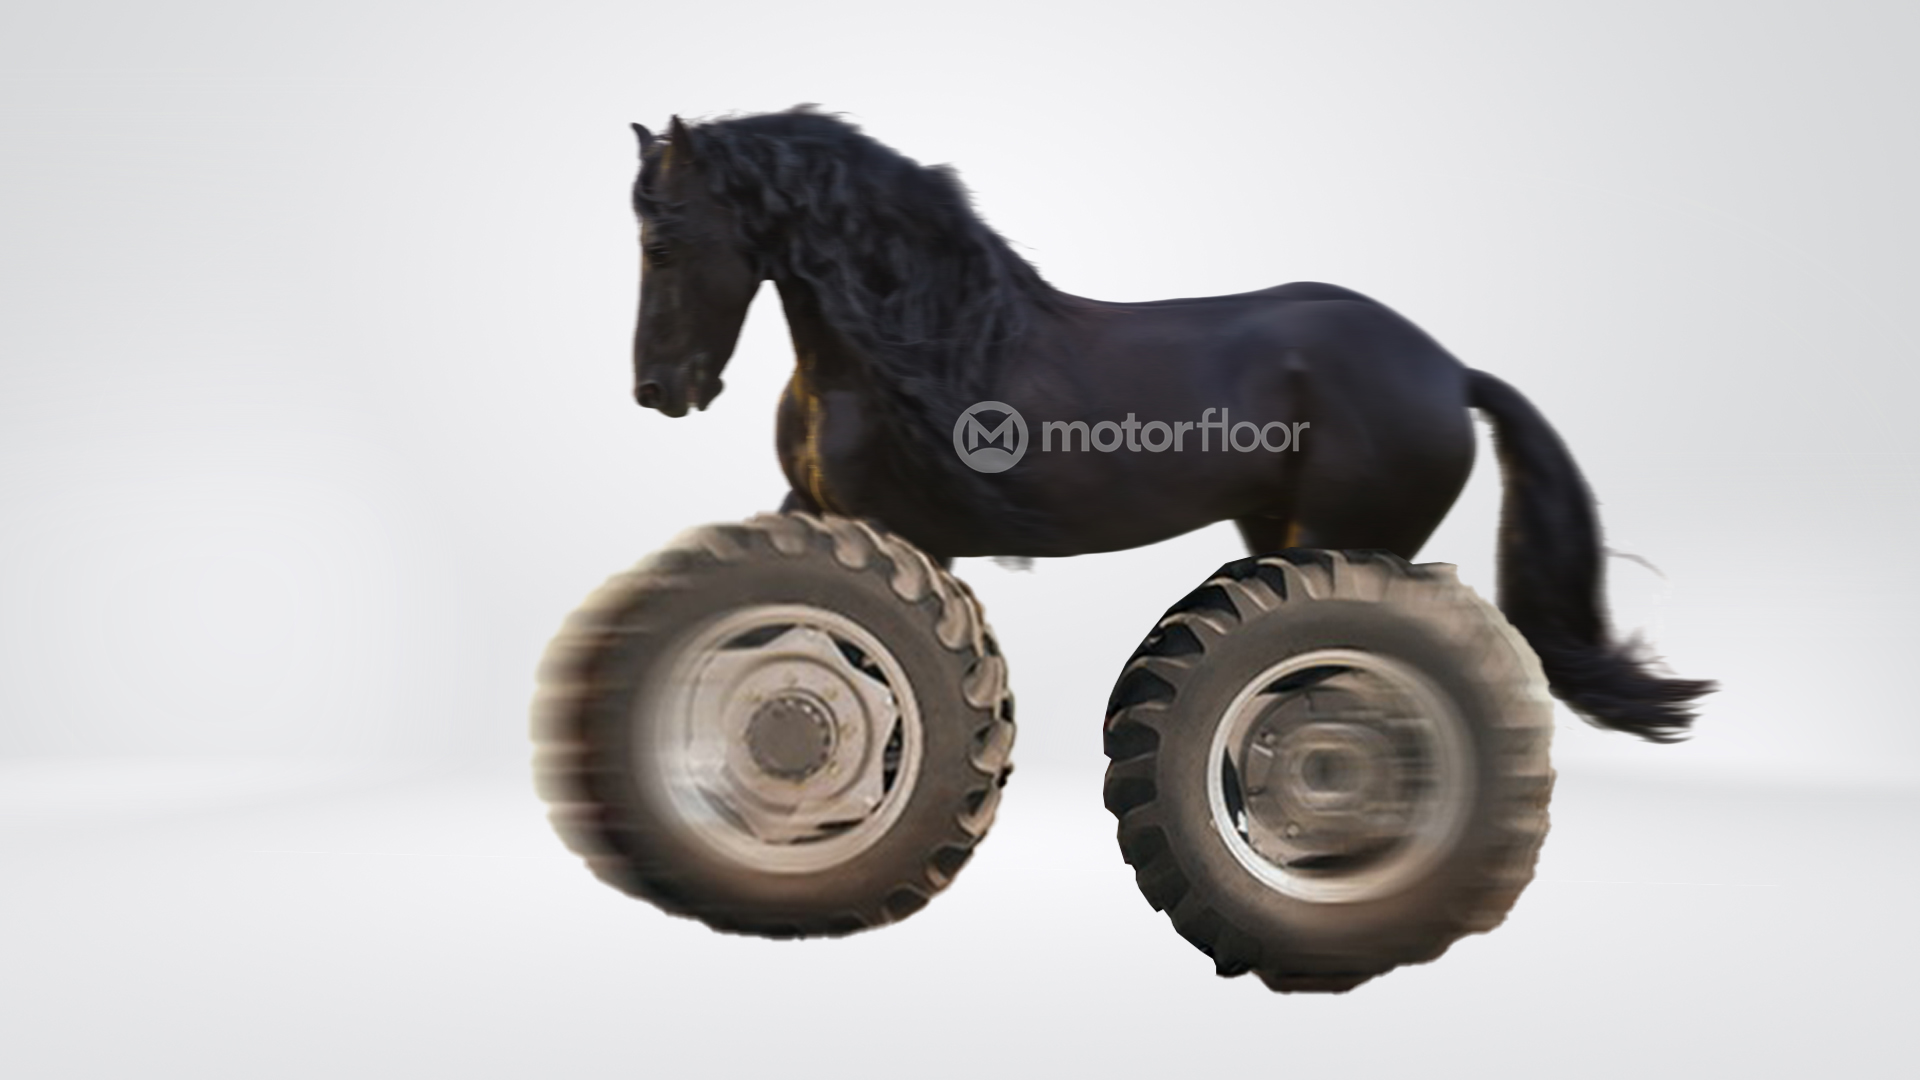 importance of horsepower in tractors